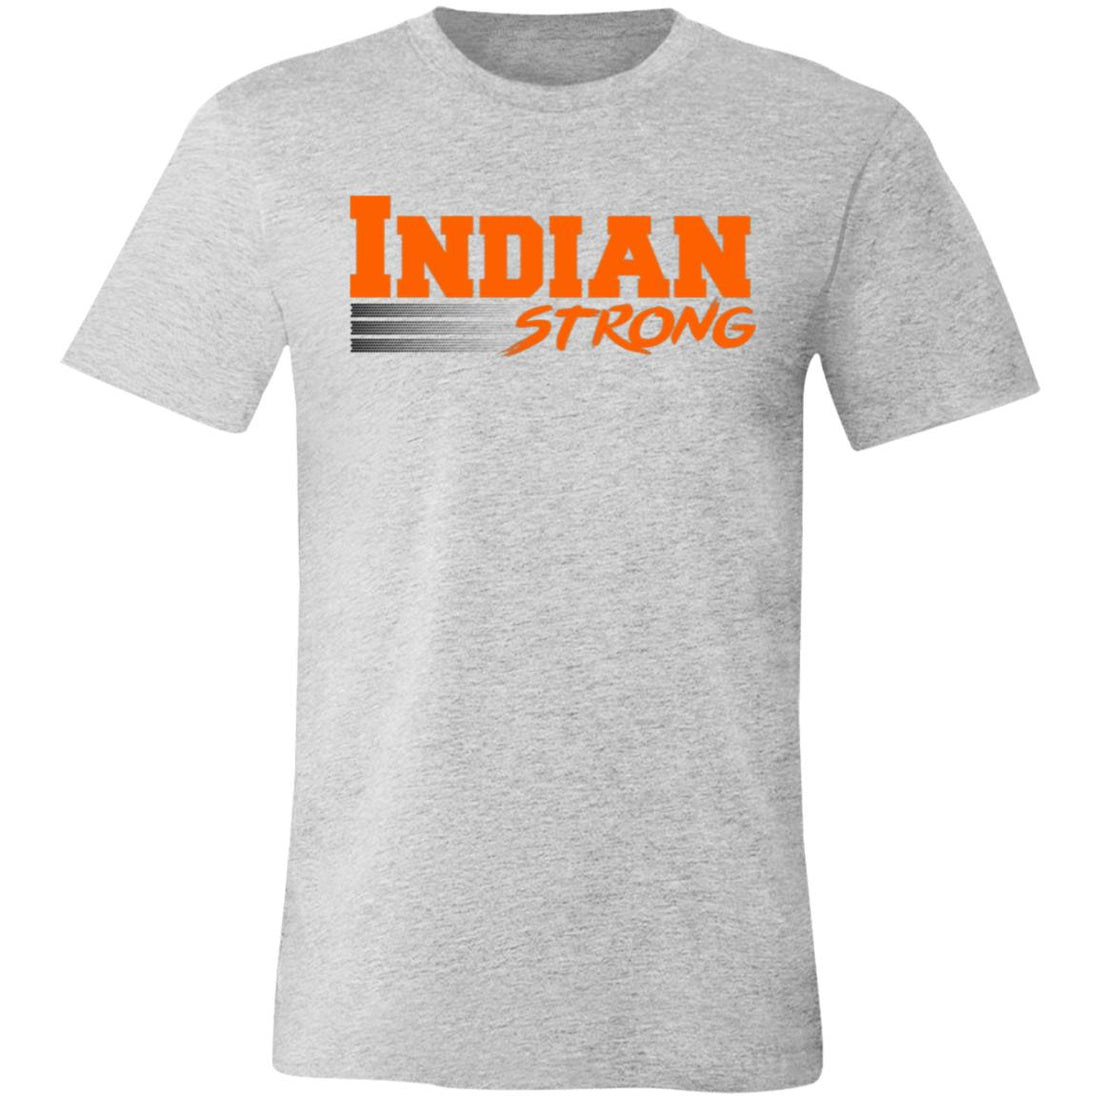 Indian Strong T-Shirt - T-Shirts - Positively Sassy - Indian Strong T-Shirt